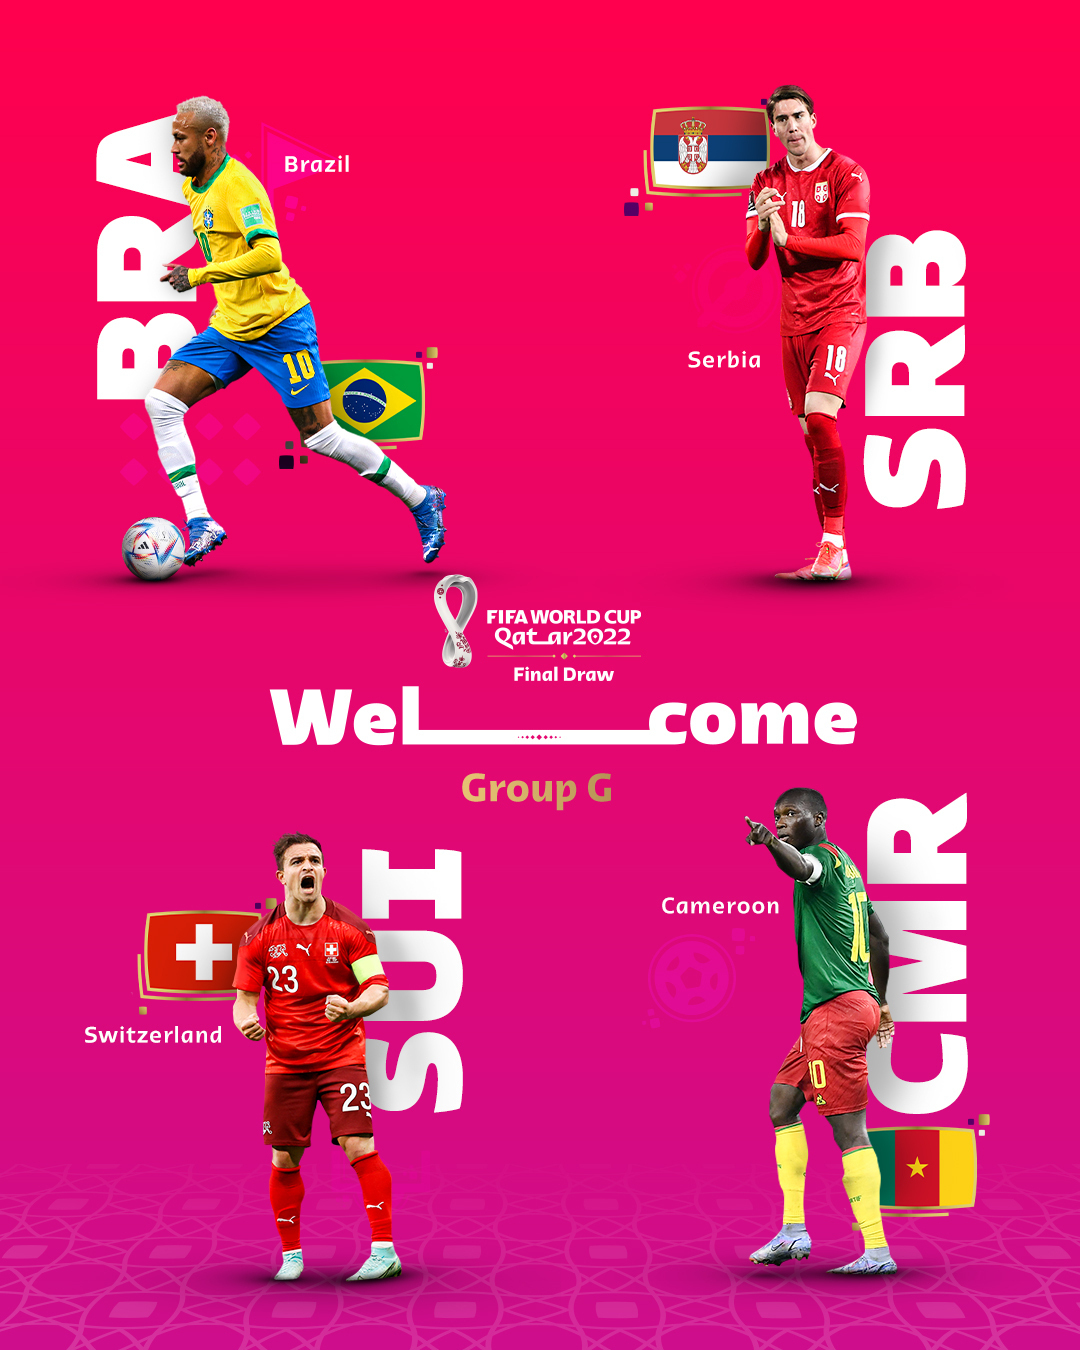 Fifa World Cup On Twitter 𝙄𝙣𝙩𝙧𝙤𝙙𝙪𝙘𝙞𝙣𝙜 𝙂𝙧𝙤𝙪𝙥 𝙂 Only Two Can Make It Out Of The Group Who